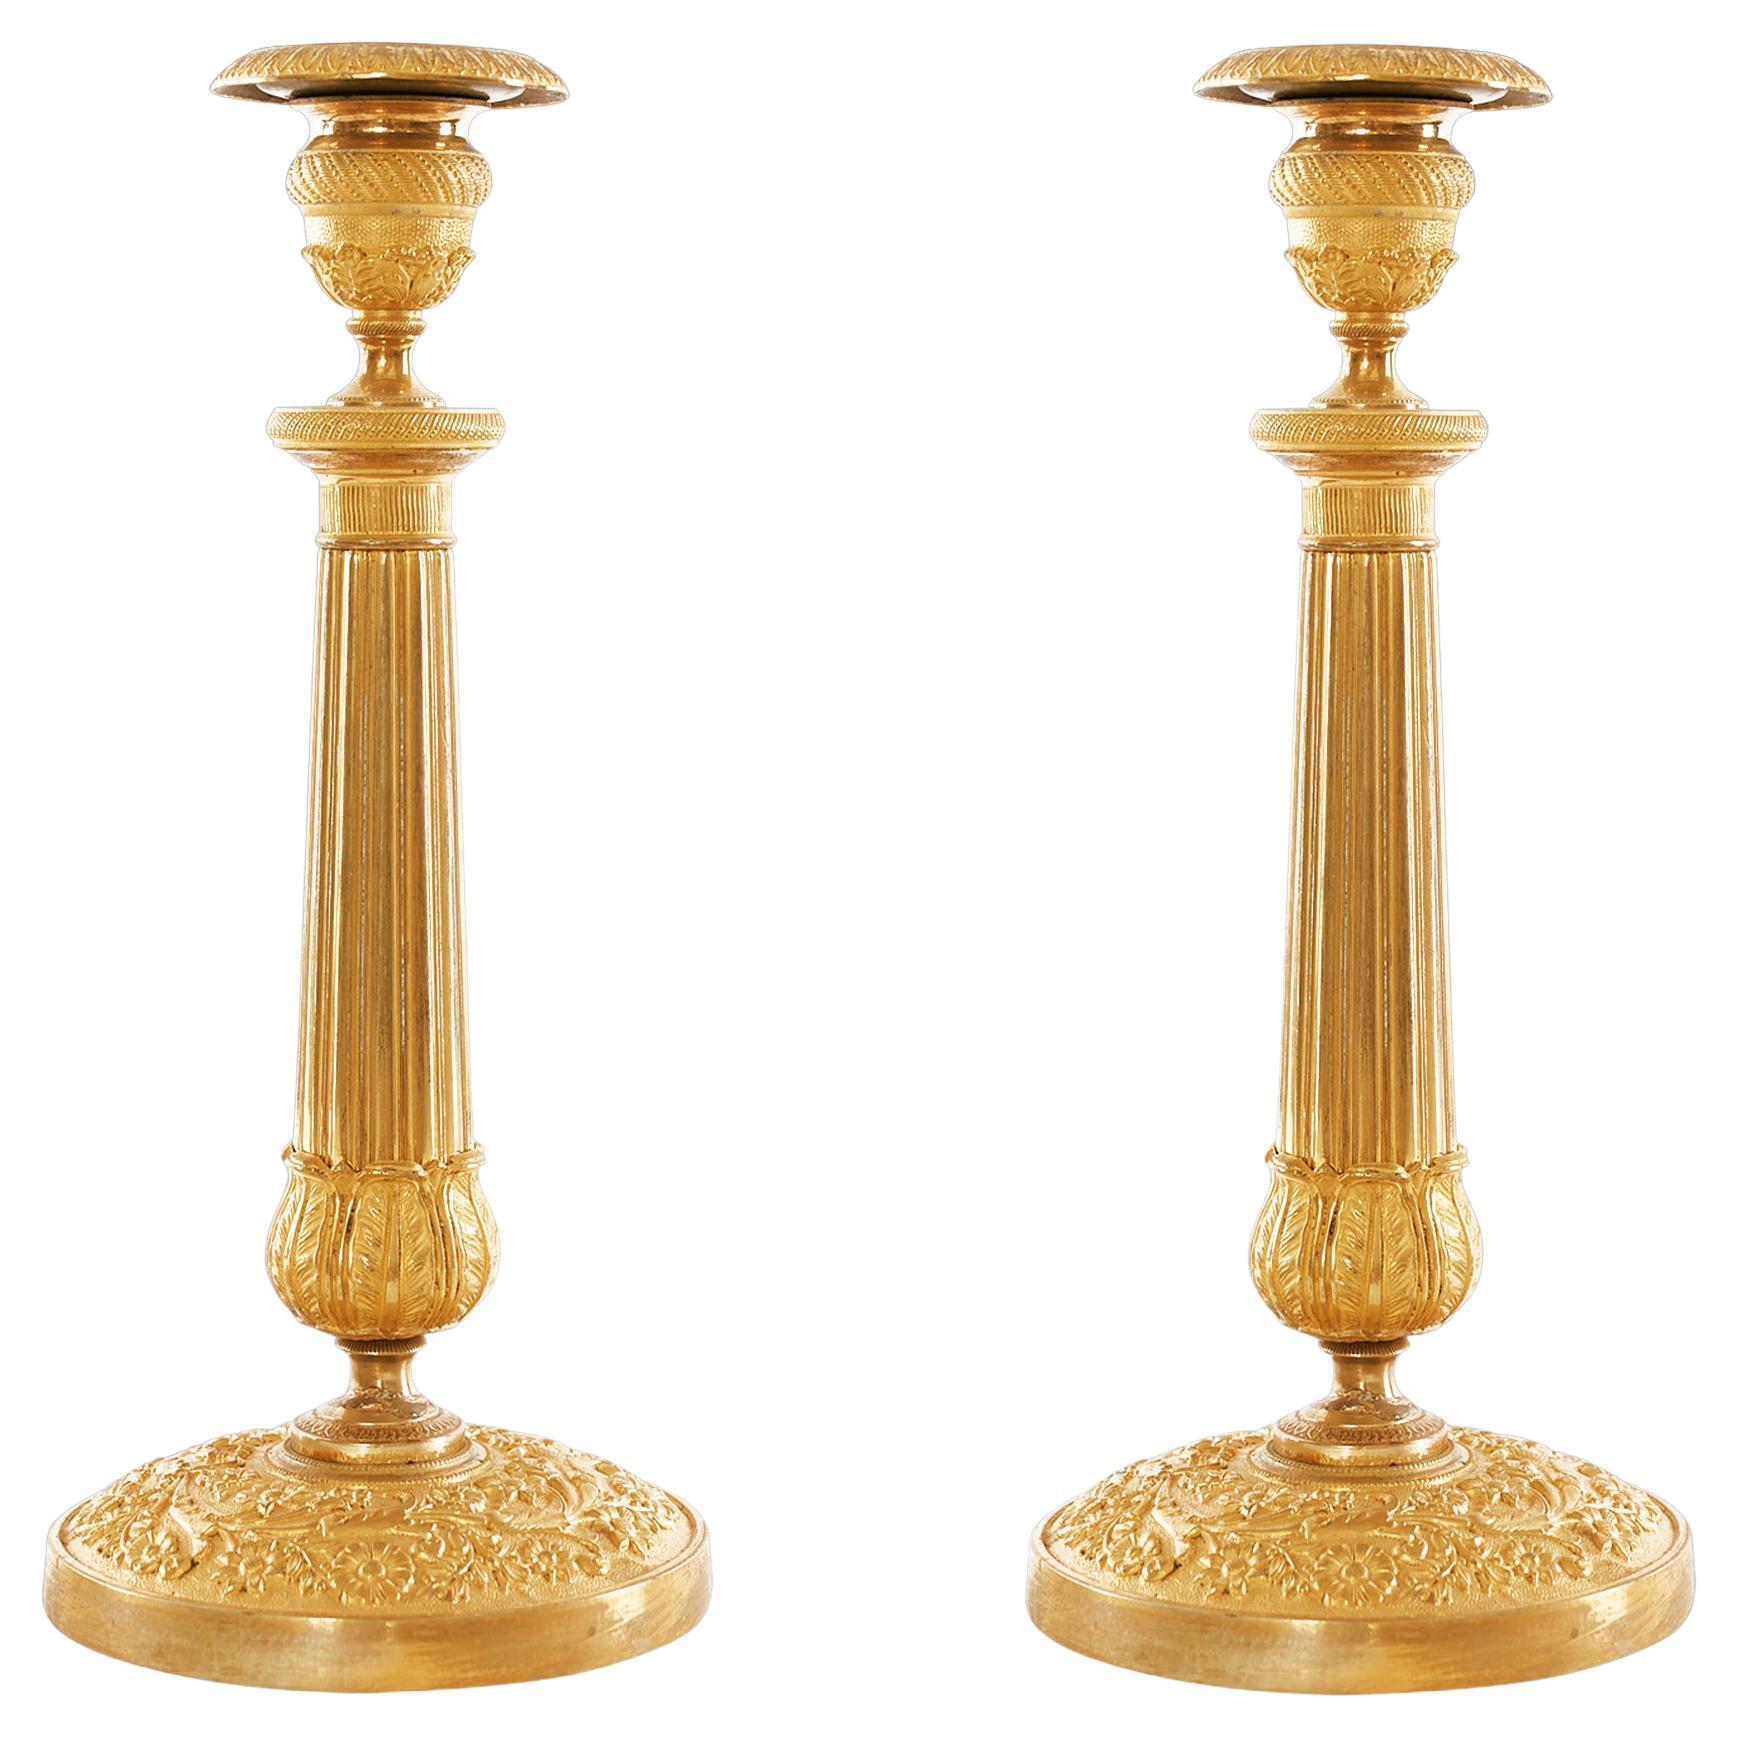 Rare Pair Of Gilt Bronze Empire French Candlesticks After Thomire For Sale